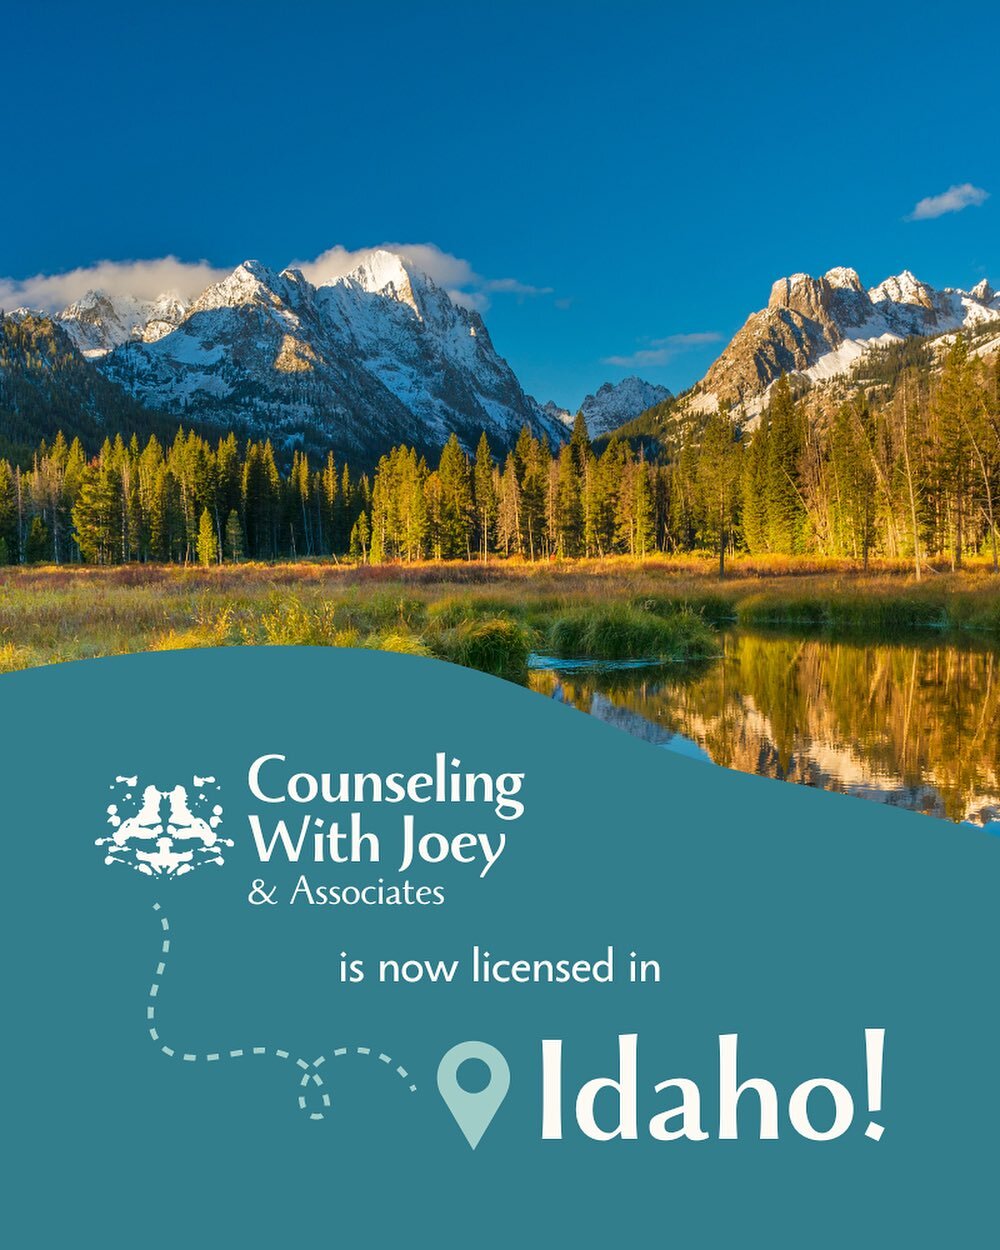 We&rsquo;re thrilled to announce that Counseling With Joey &amp; Associates is now licensed to provide telehealth services in Idaho! Our licensure is expanding every day - The Gem State is joining California, Colorado, Connecticut, Indiana, Nevada, T